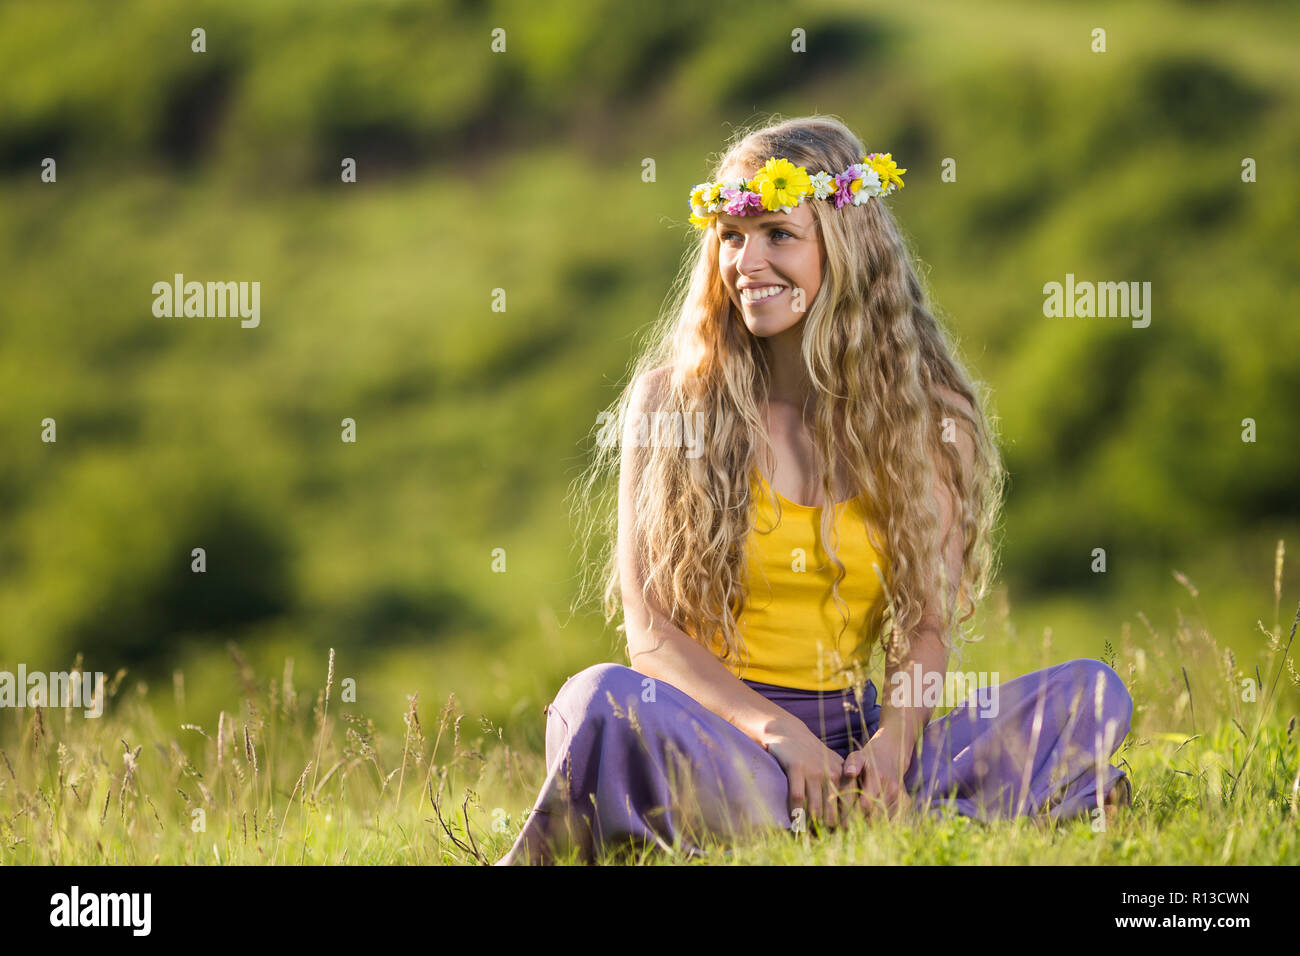 plus Veluddannet låg Beautiful woman with wreath on her blonde hair enjoys in the nature Stock  Photo - Alamy